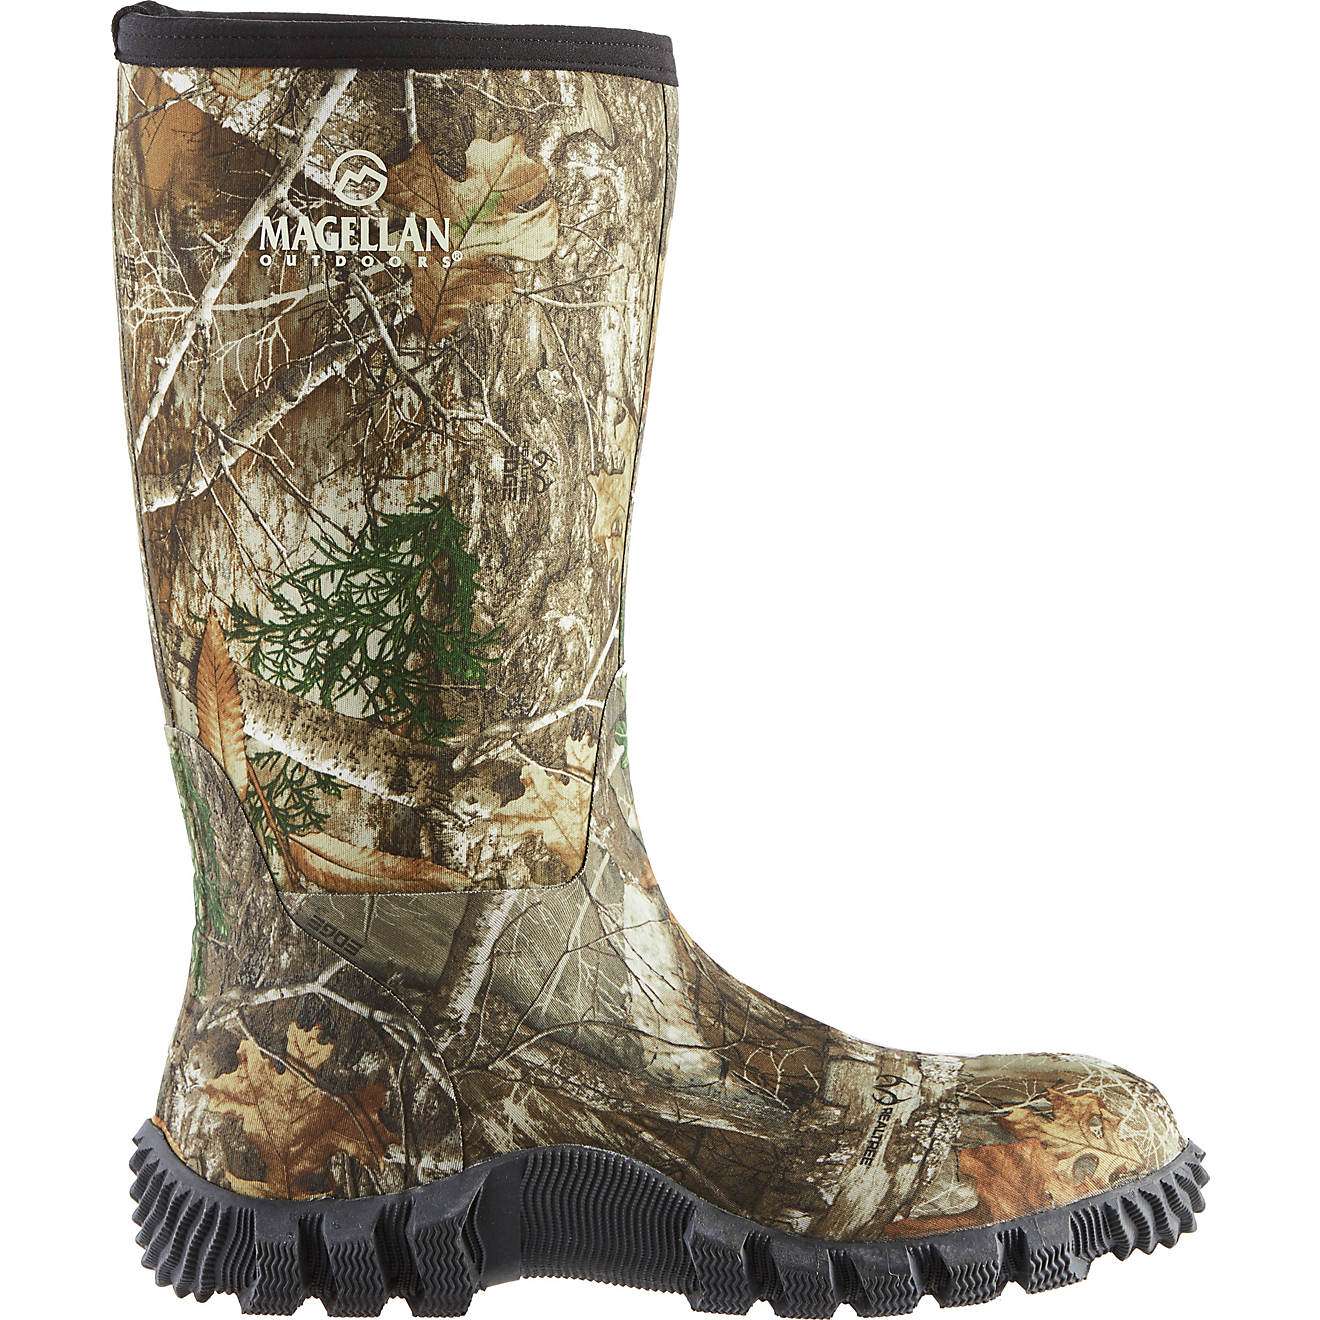 <p><strong>Magellan Outdoors Men's Field Boot III Hunting Boots</strong><br> A good pair of waterproof hunting boots is crucial for early season hunting. Magellan Outdoors Men's Field Boot III Hunting boots are going to keep your feet comfortable and dry all fall. <a href=